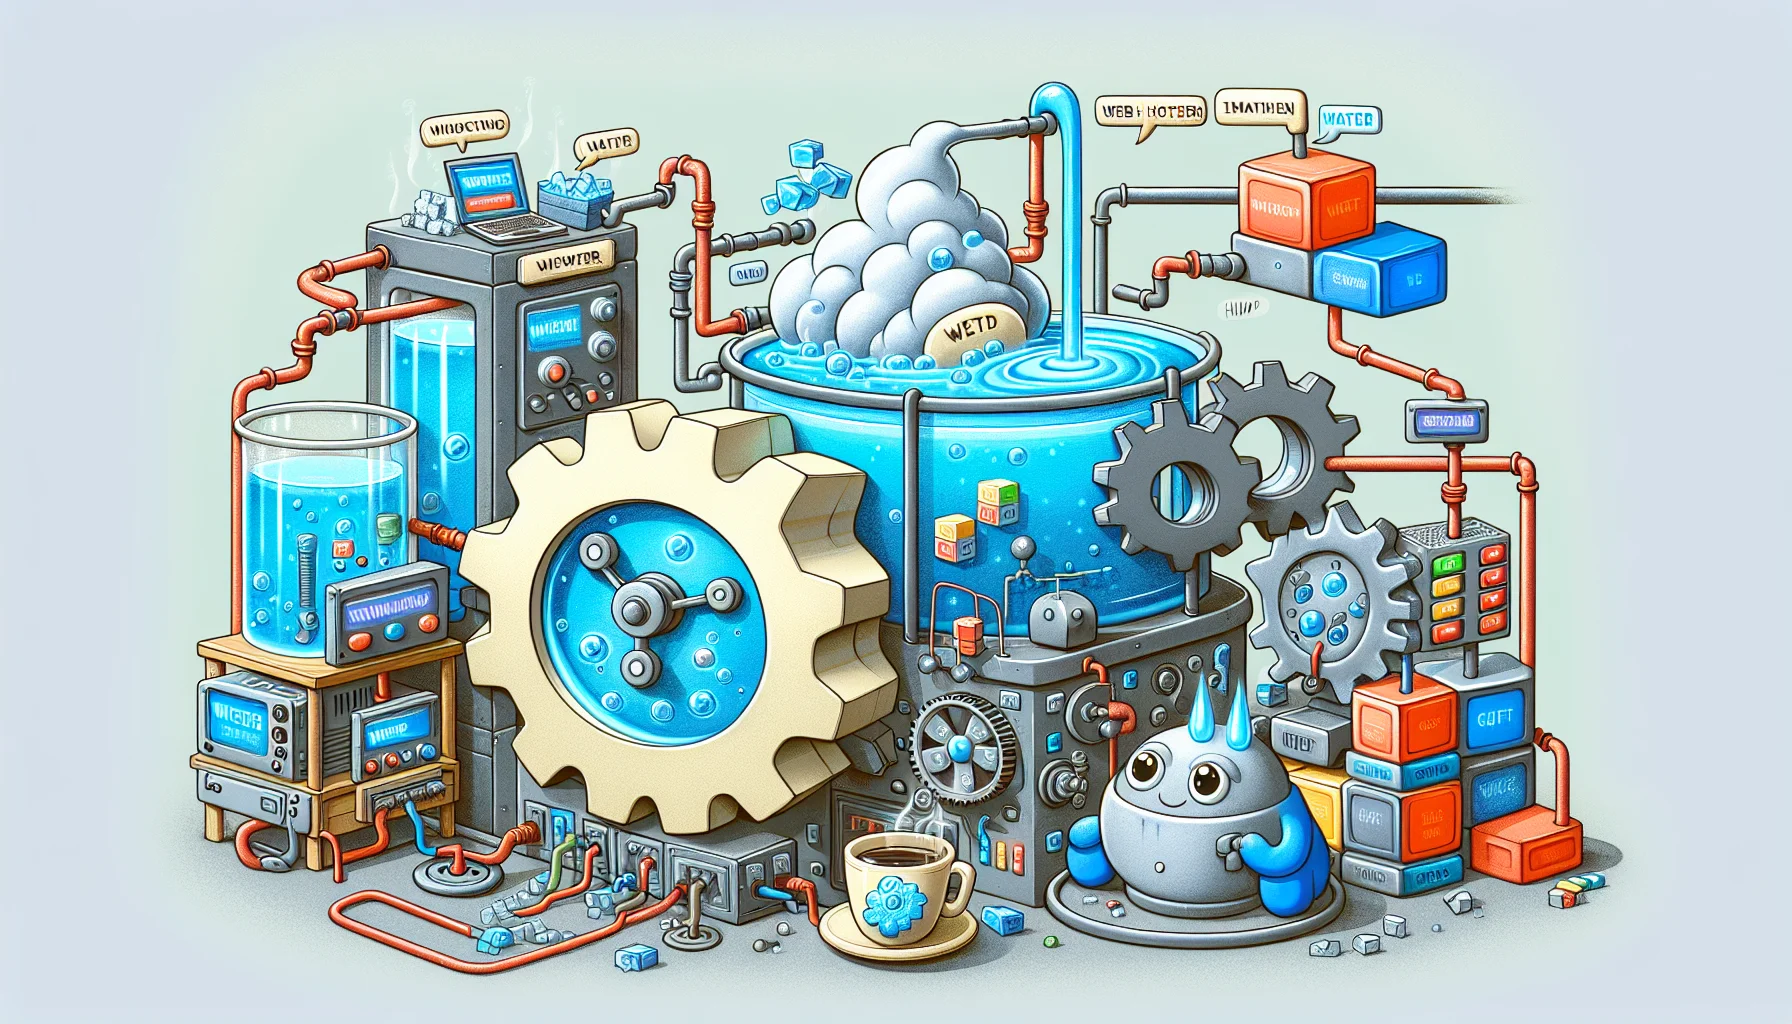 Create an amusing scenario where a literally interpreted 'fluid engine' is being used to power a website in a physical representation of web hosting. The fluid engine is composed of gears and components made of water, steam, and ice. Imagine various types of data represented as different shapes and colors of blocks, flowing through the pipework of the engine. Also depict the 'web host', a friendly looking anthropomorphic computer sitting beside the engine with a cup of coffee, overseeing the operations. All elements should be portrayed in a playful, cartoonish style to emphasize the humor.